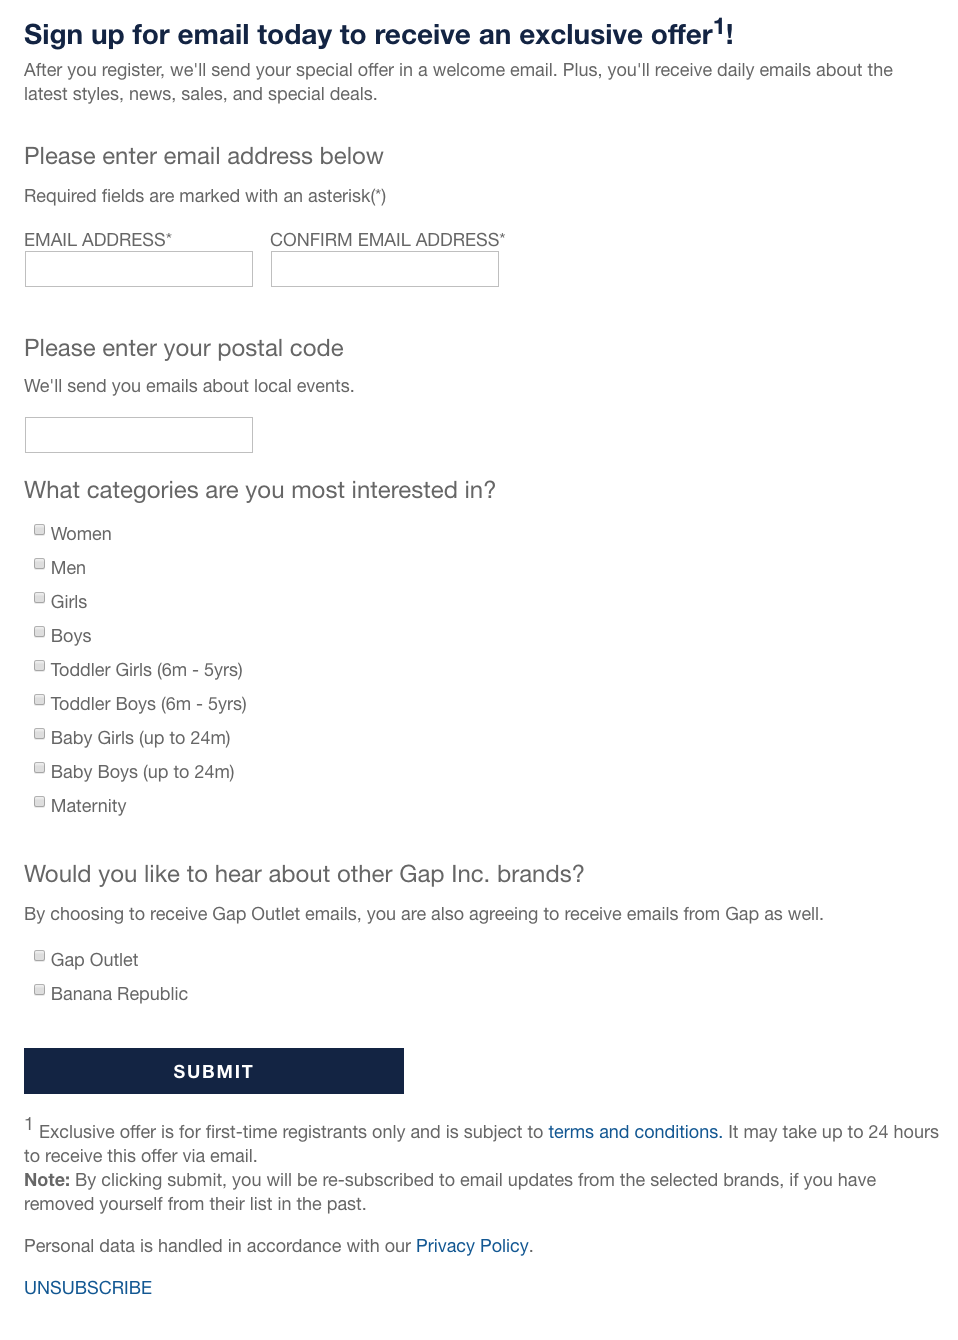 Email marketing sign-up form - Gap